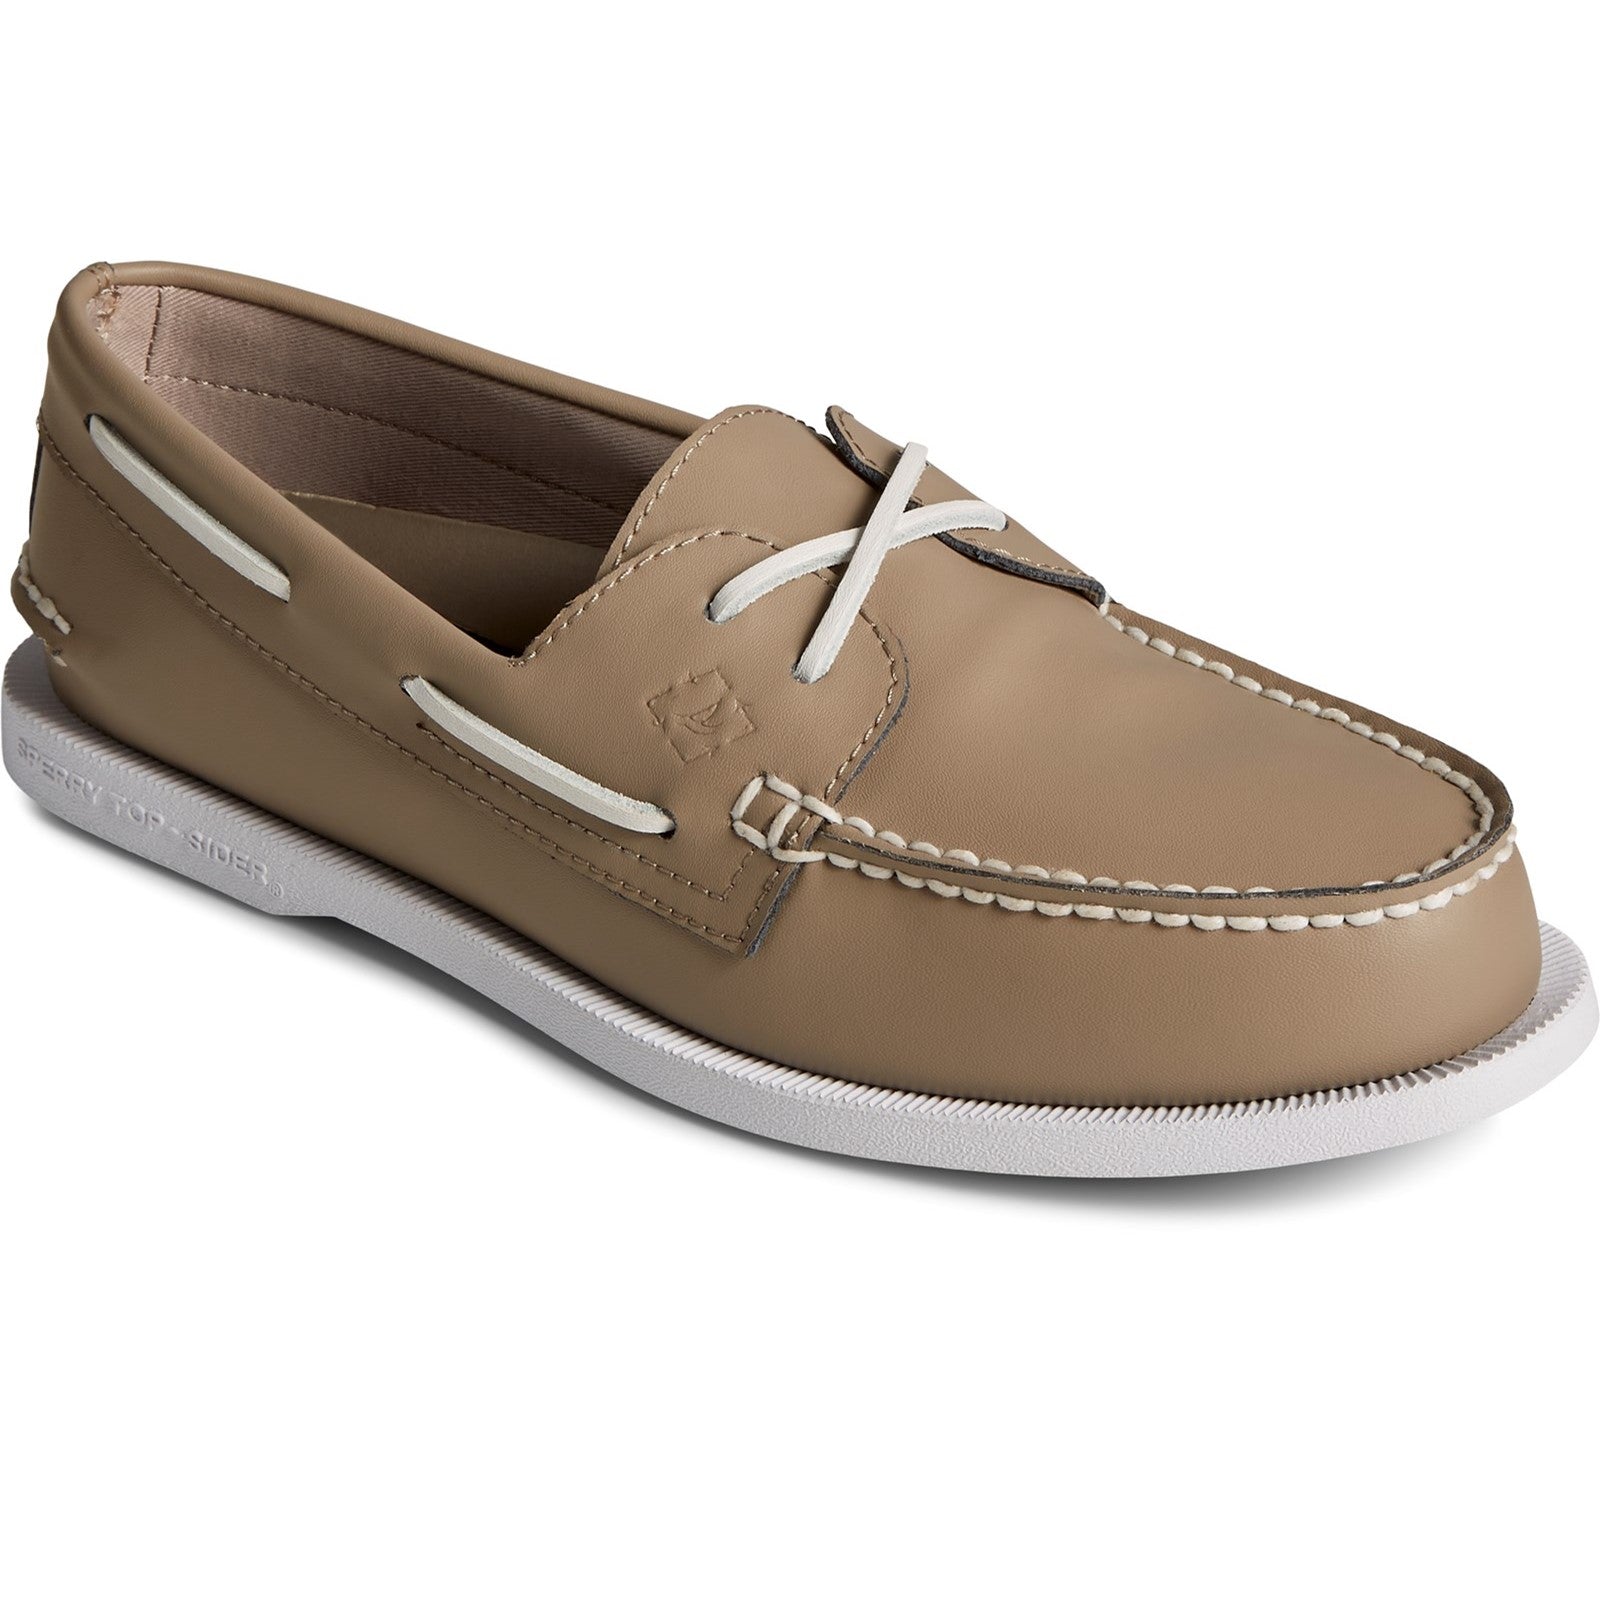 Sperry Mens Authentic Original 2-Eye Boat Shoes - Taupe